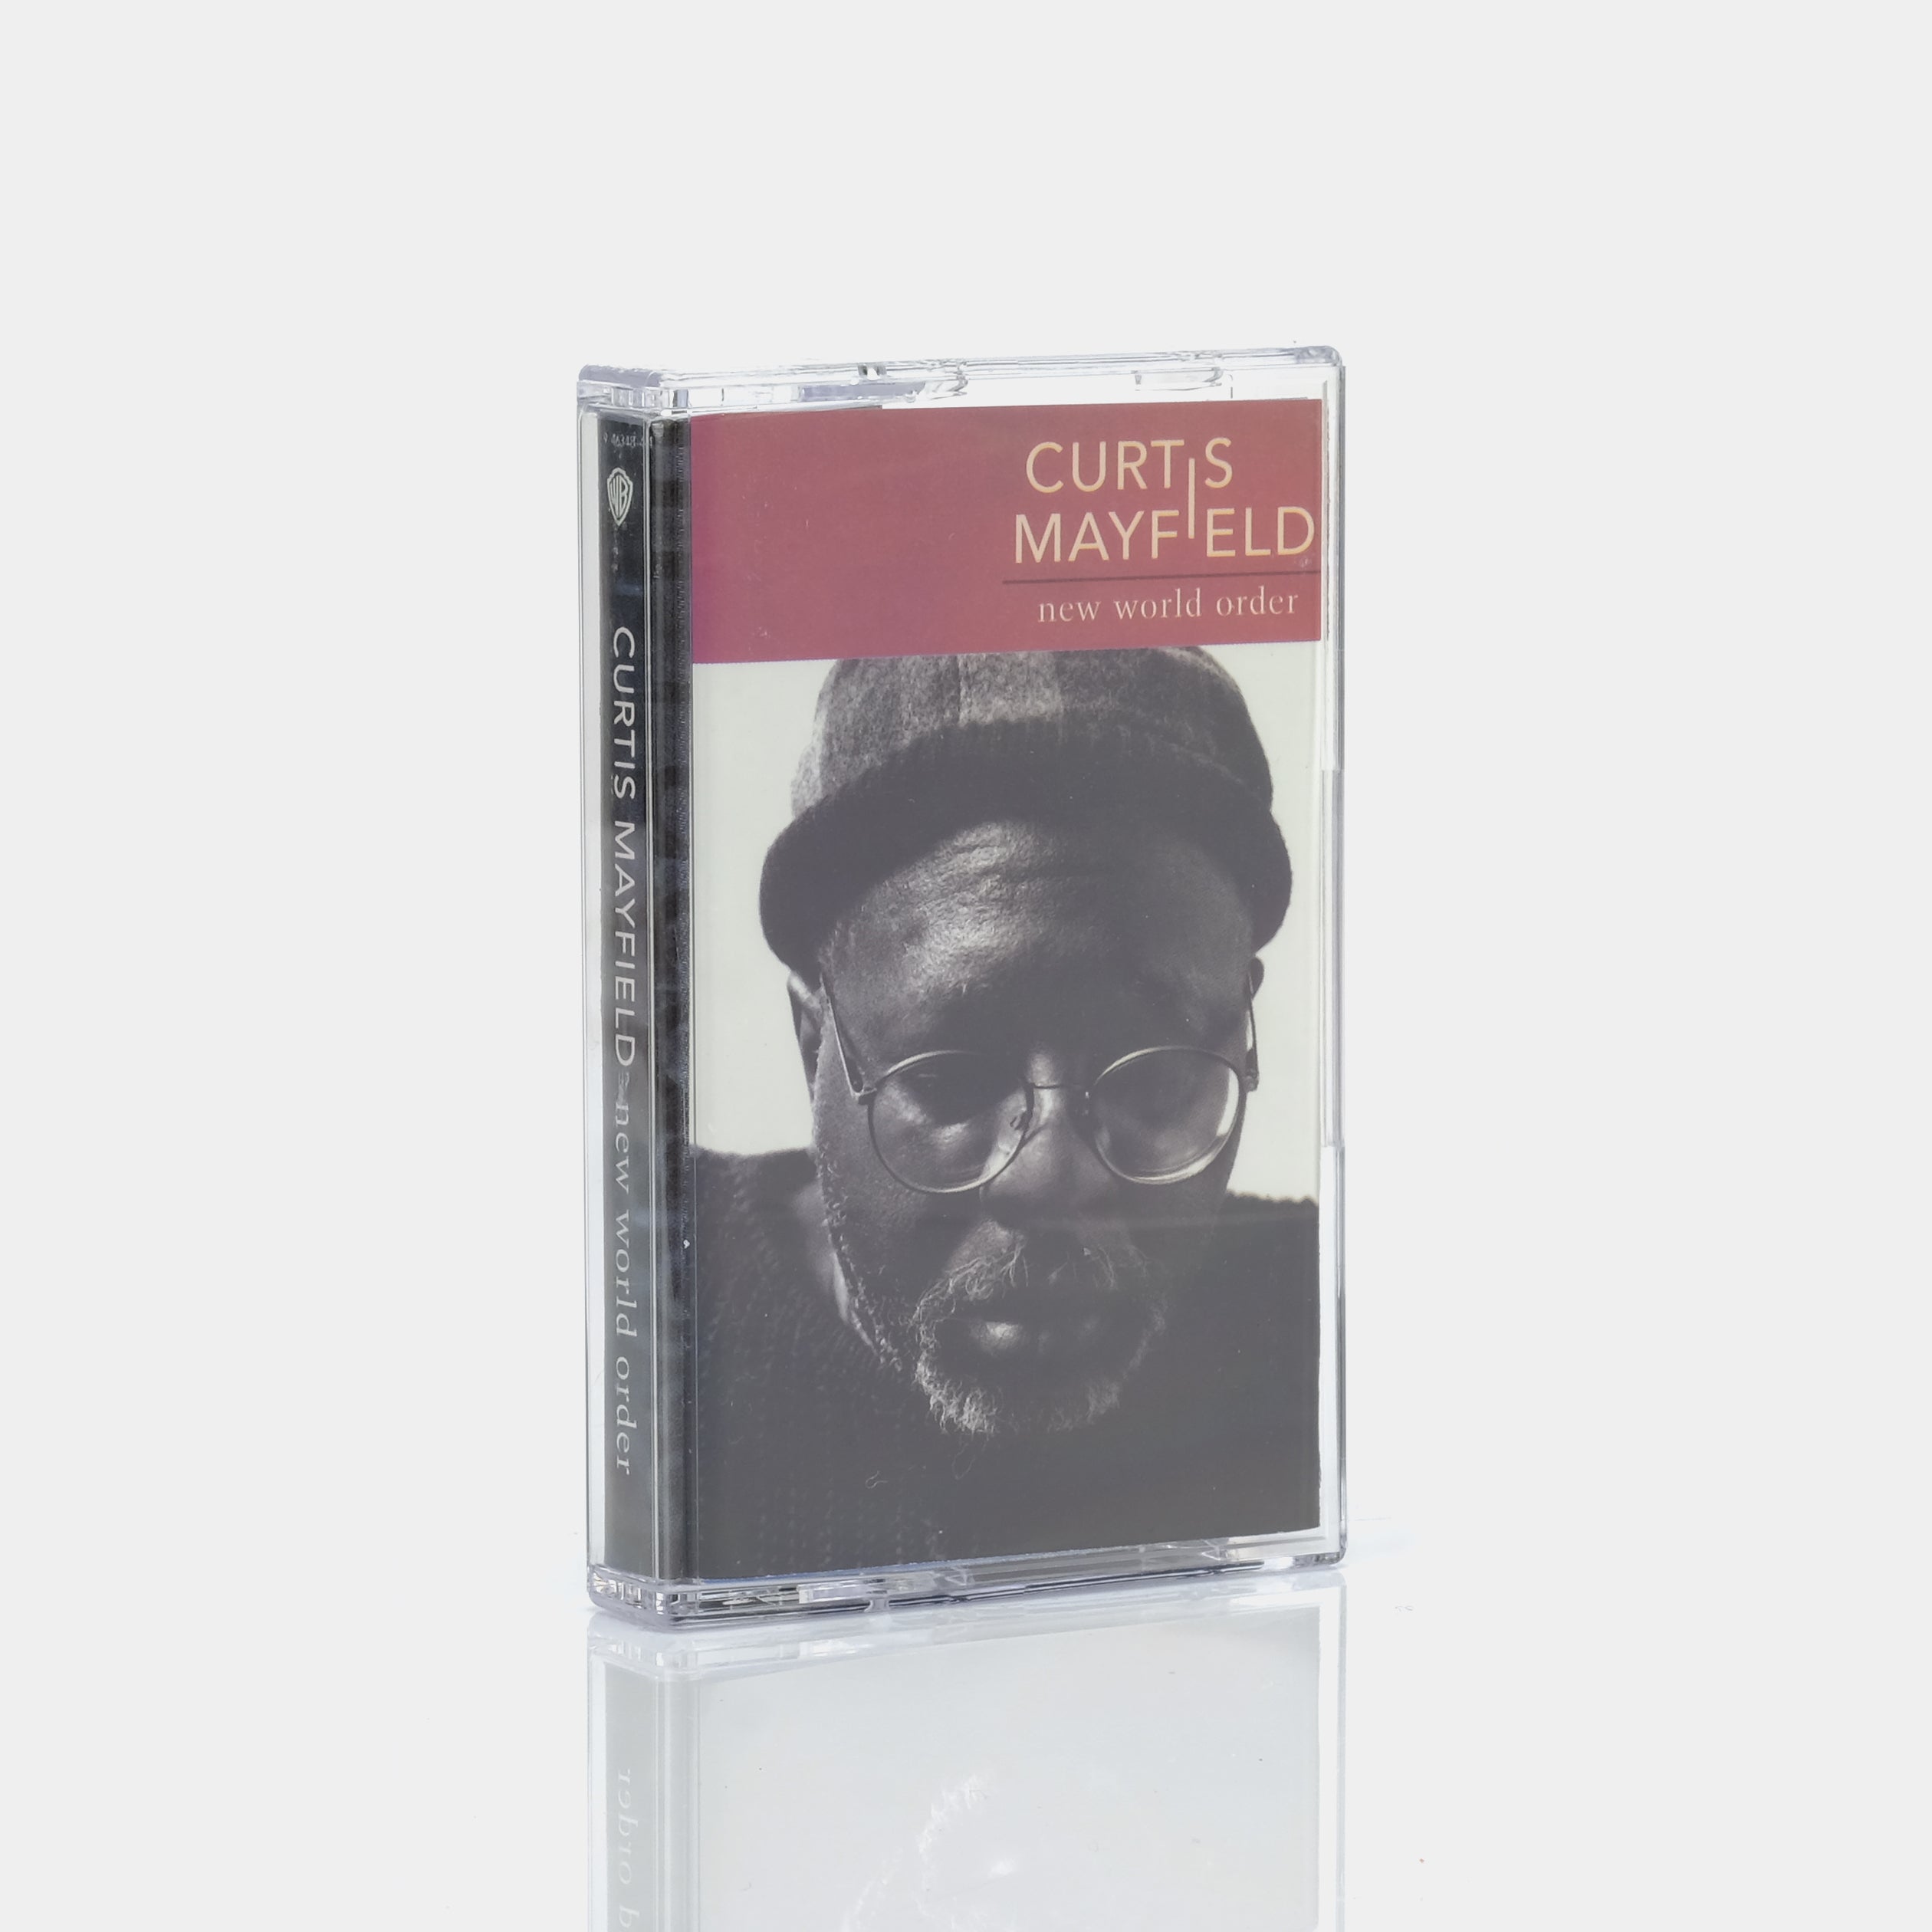 Curtis Mayfield - New World Order Cassette Tape